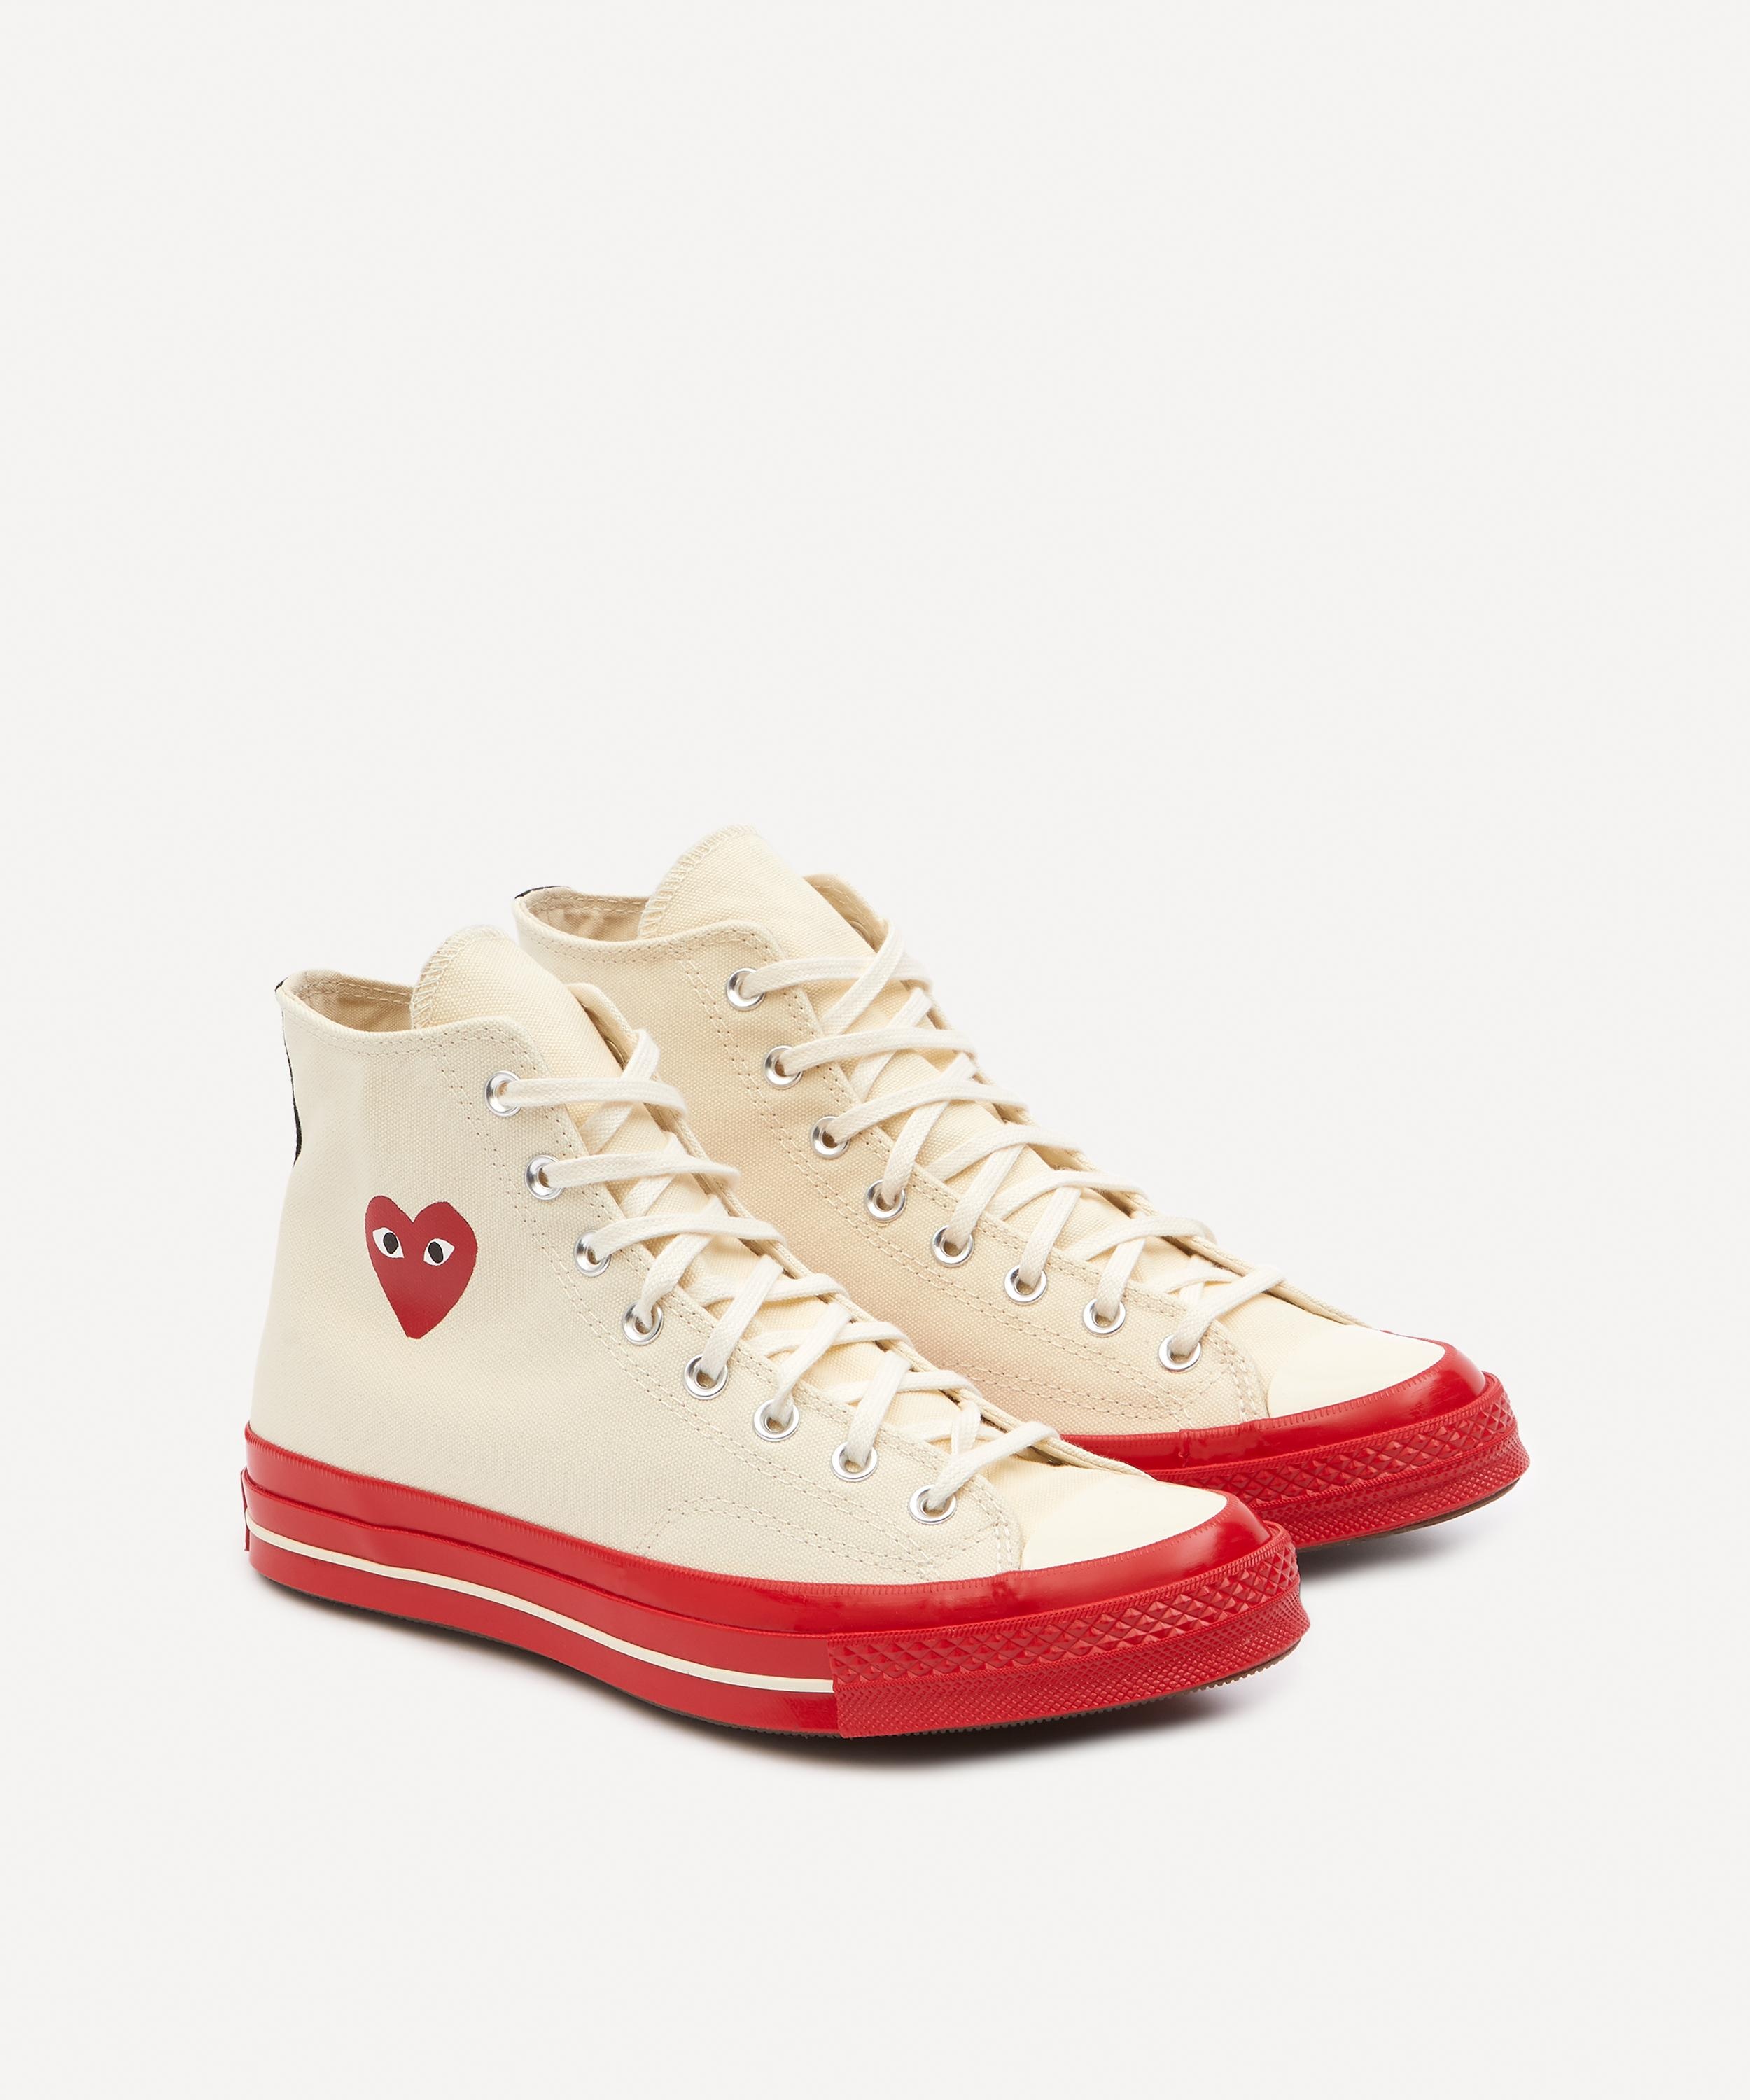 x Converse 70s Hi-Top Red Sole Canvas Trainers - 1